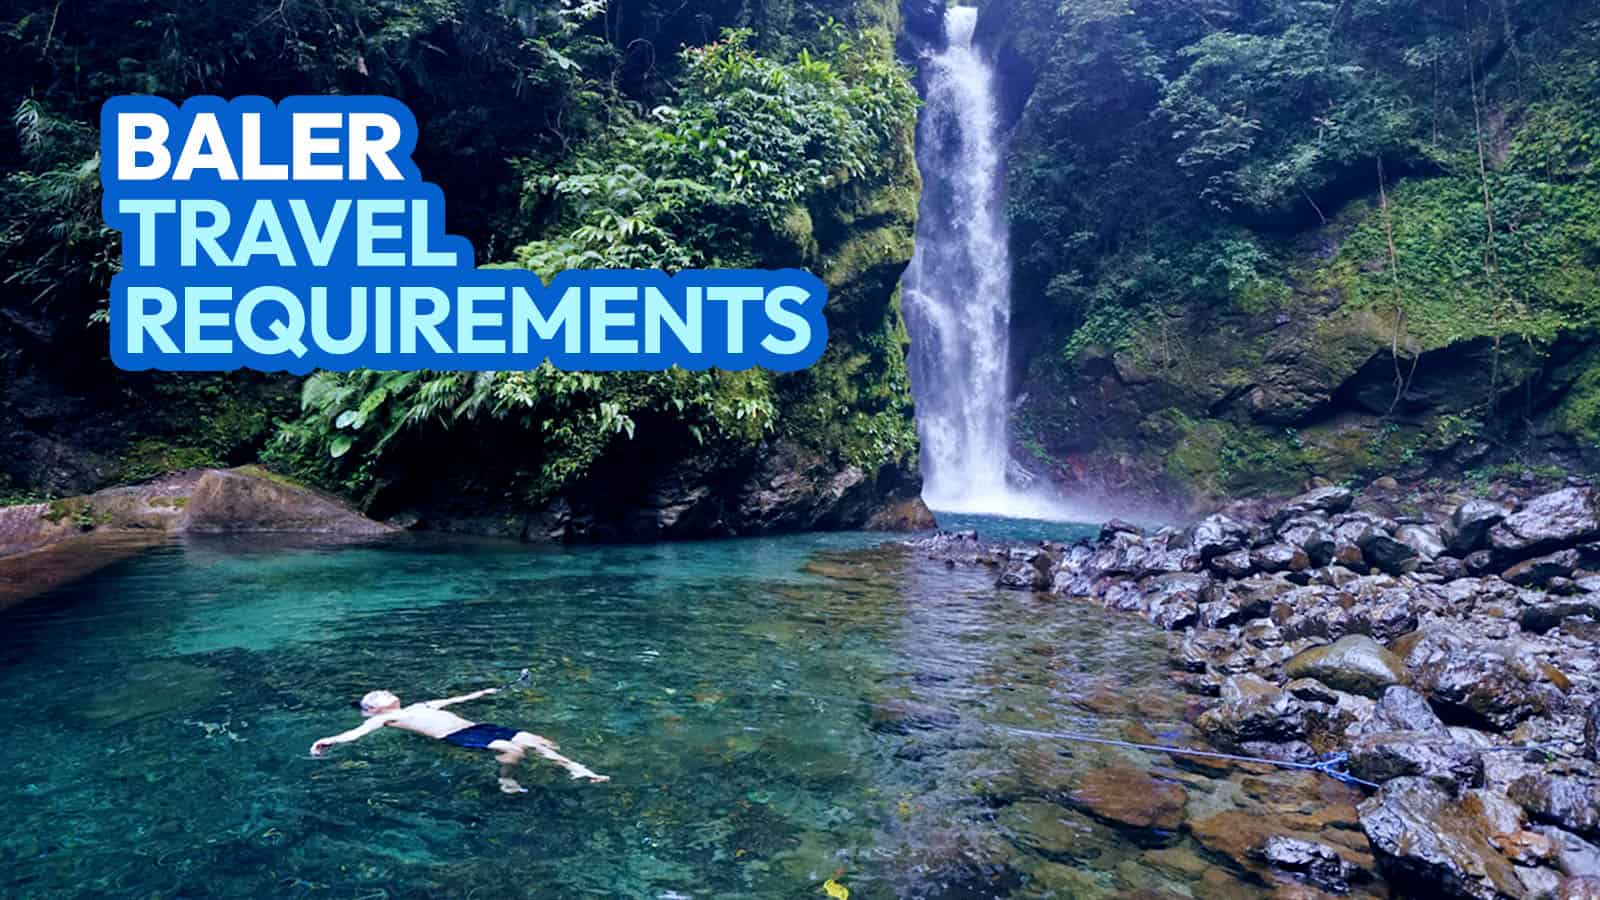 2022 BALER TRAVEL REQUIREMENTS + List of Accredited Beach Resorts & Hotels